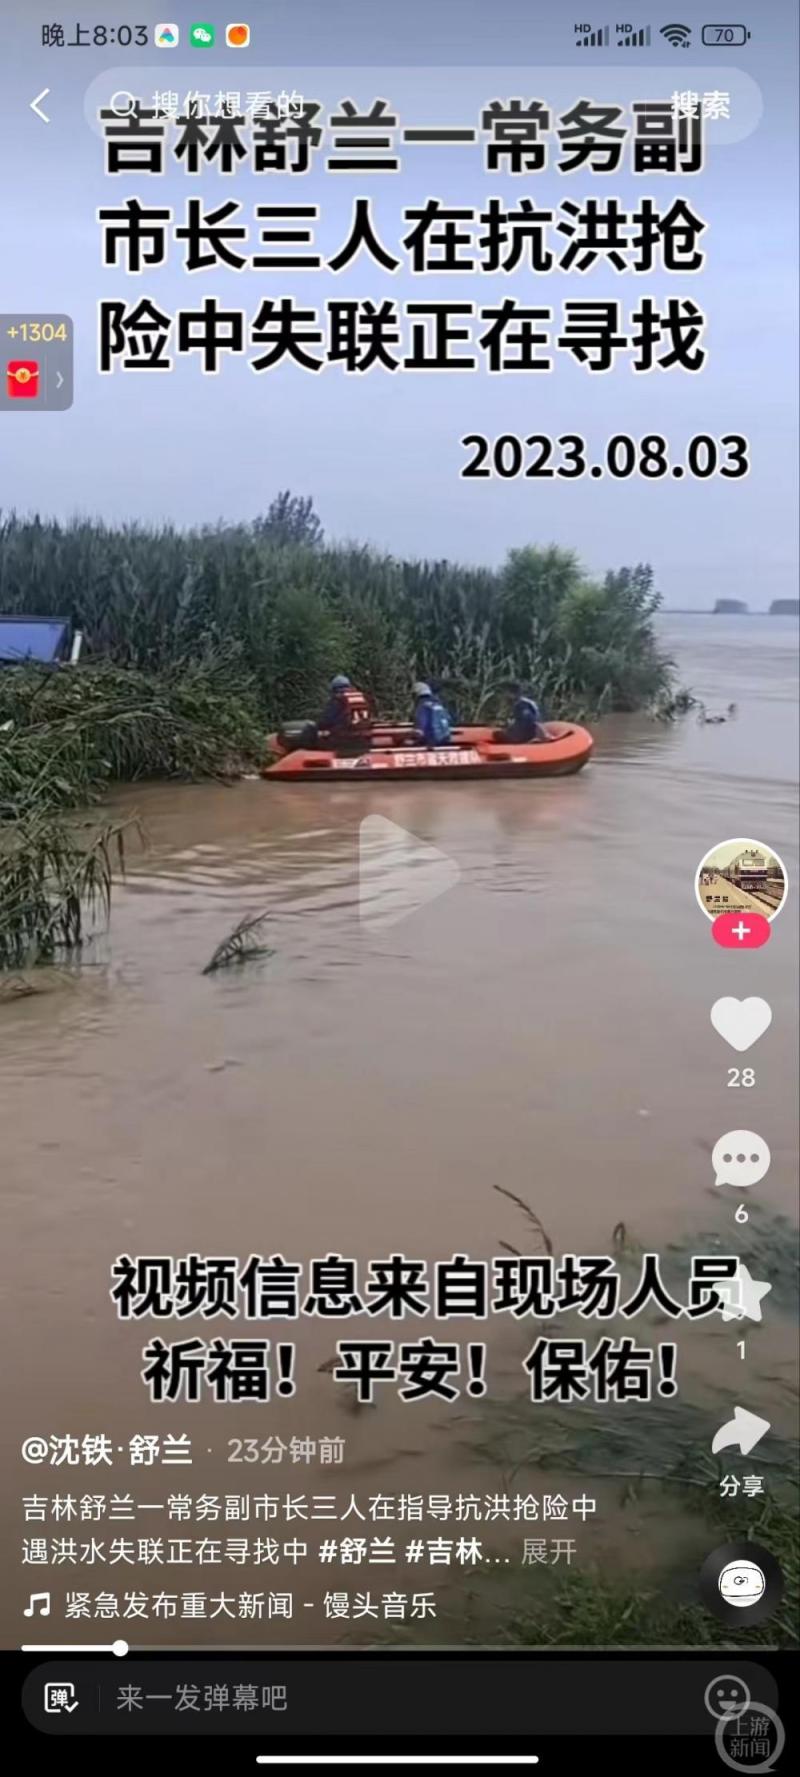 There are reports that search and rescue efforts are underway. Heavy rainfall in Shulan City, Jilin Province has caused four people, including the deputy mayor, to lose contact with the flood control team? Local authorities have not denied rainfall | flooding | ongoing search